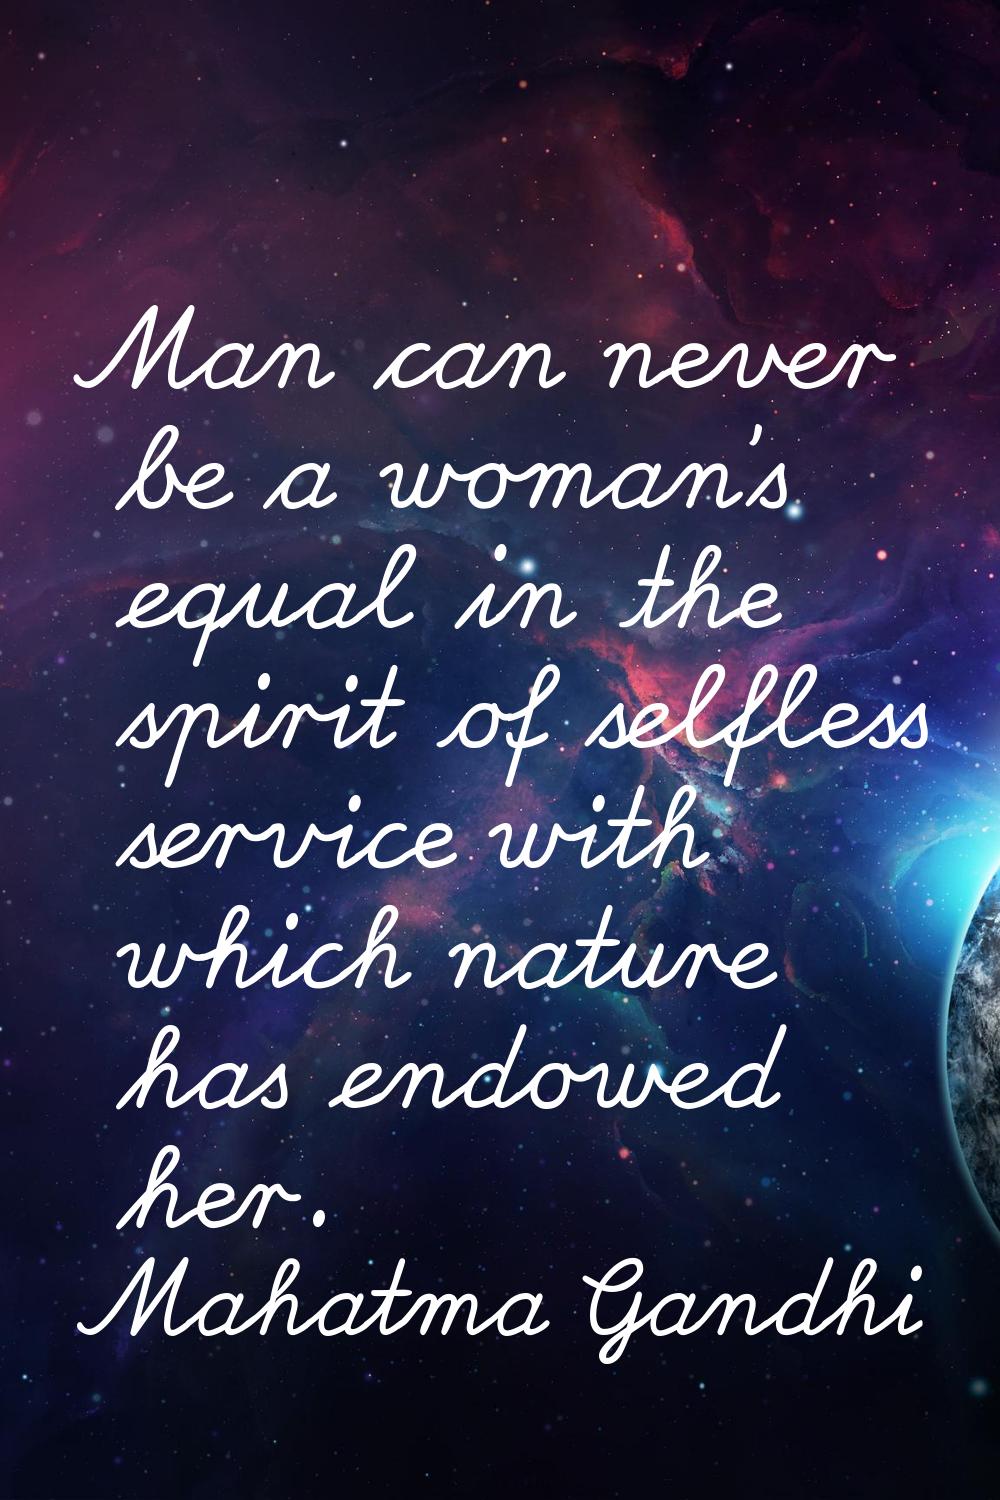 Man can never be a woman's equal in the spirit of selfless service with which nature has endowed he